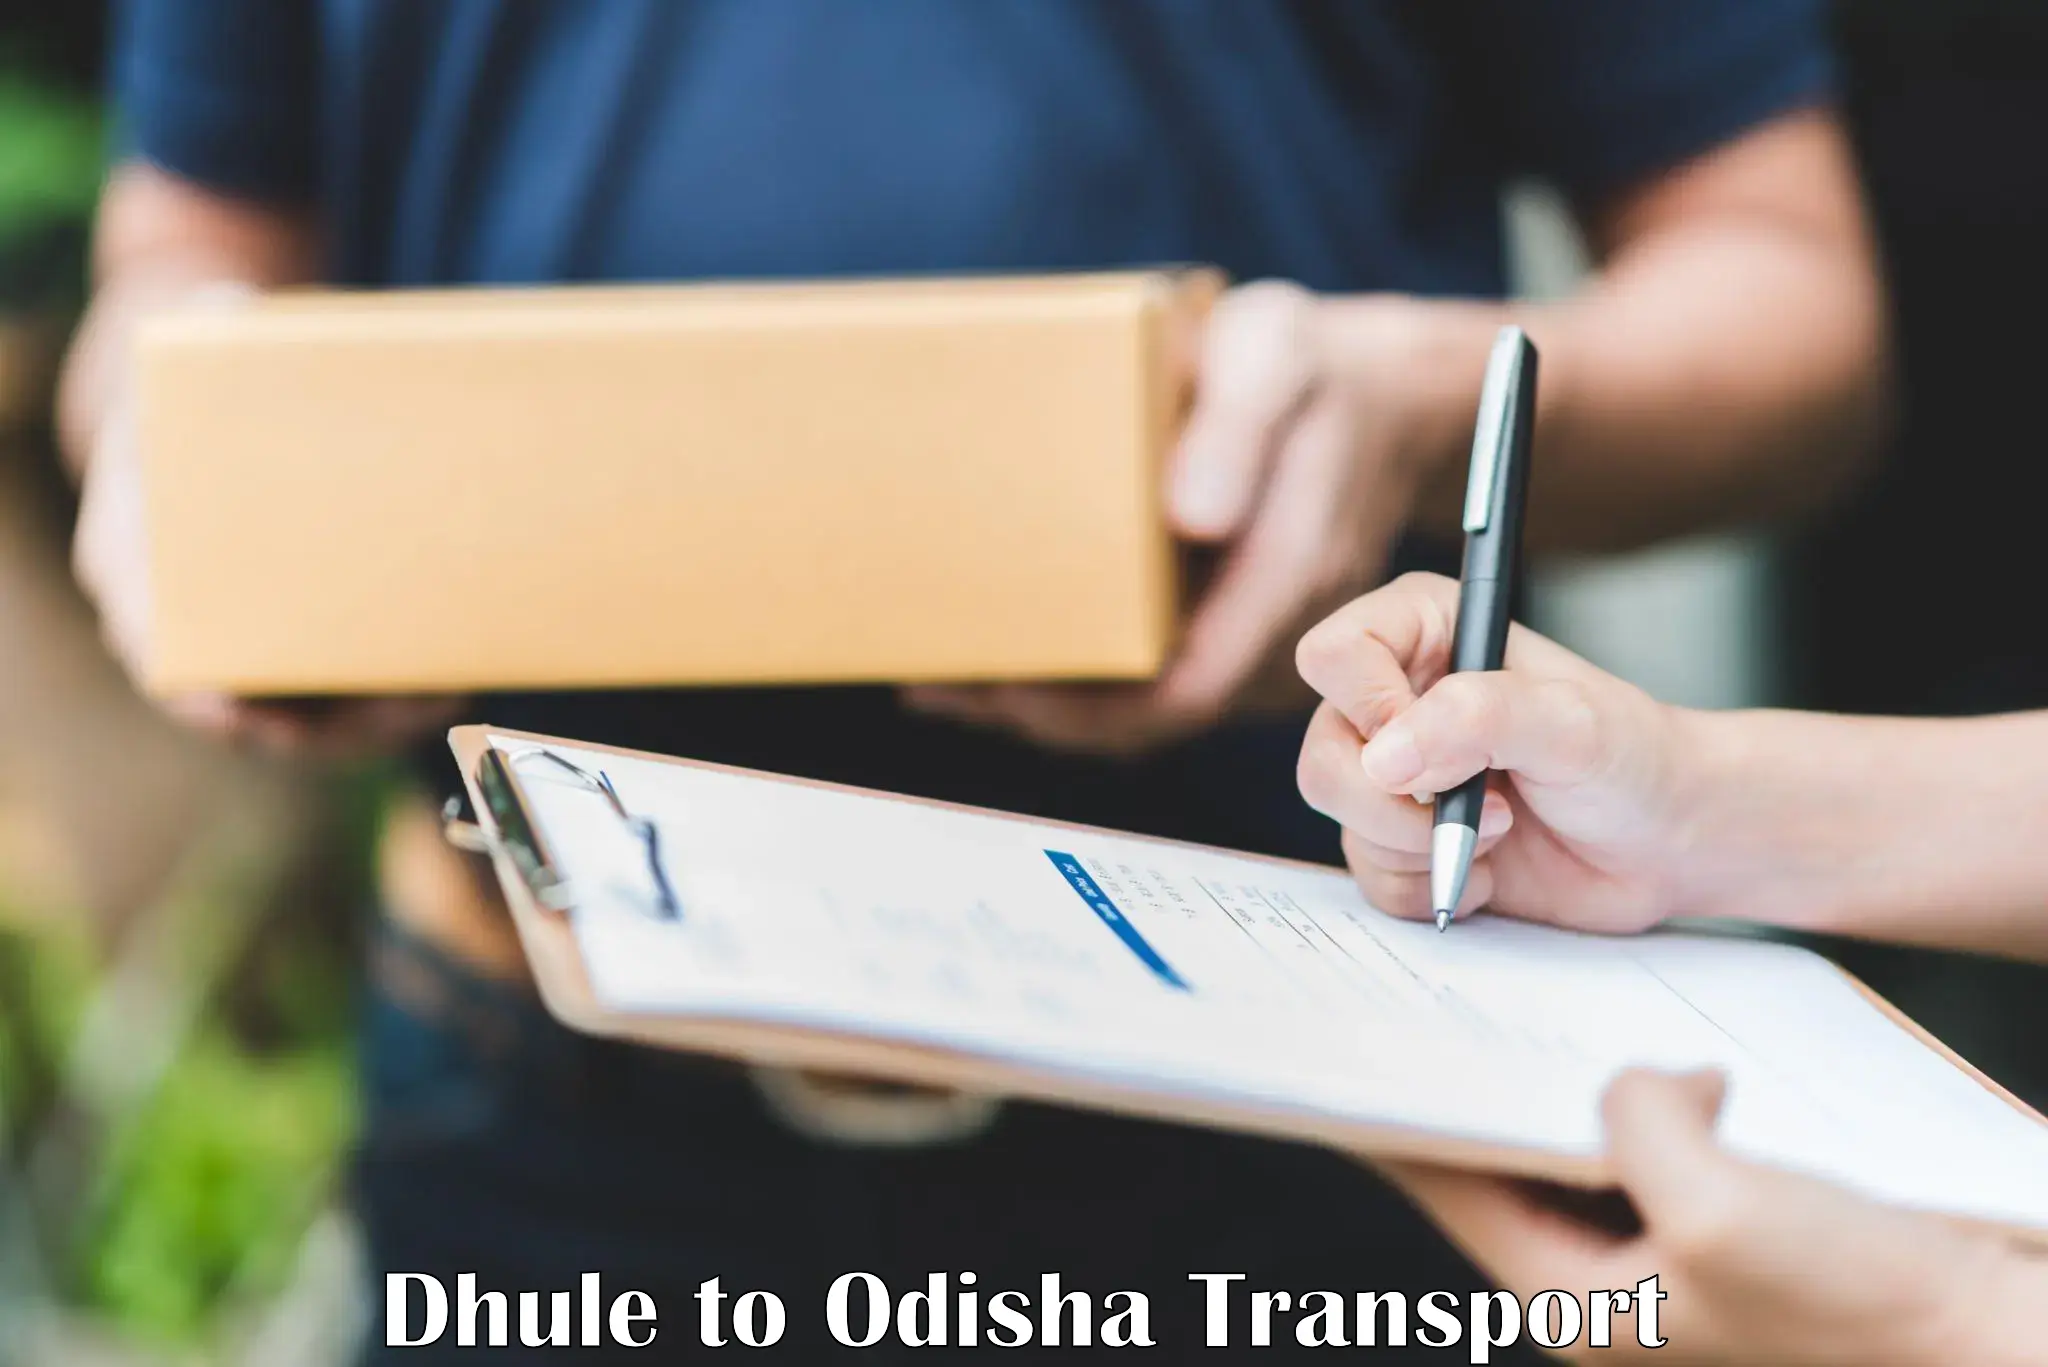 Commercial transport service Dhule to Dandisahi